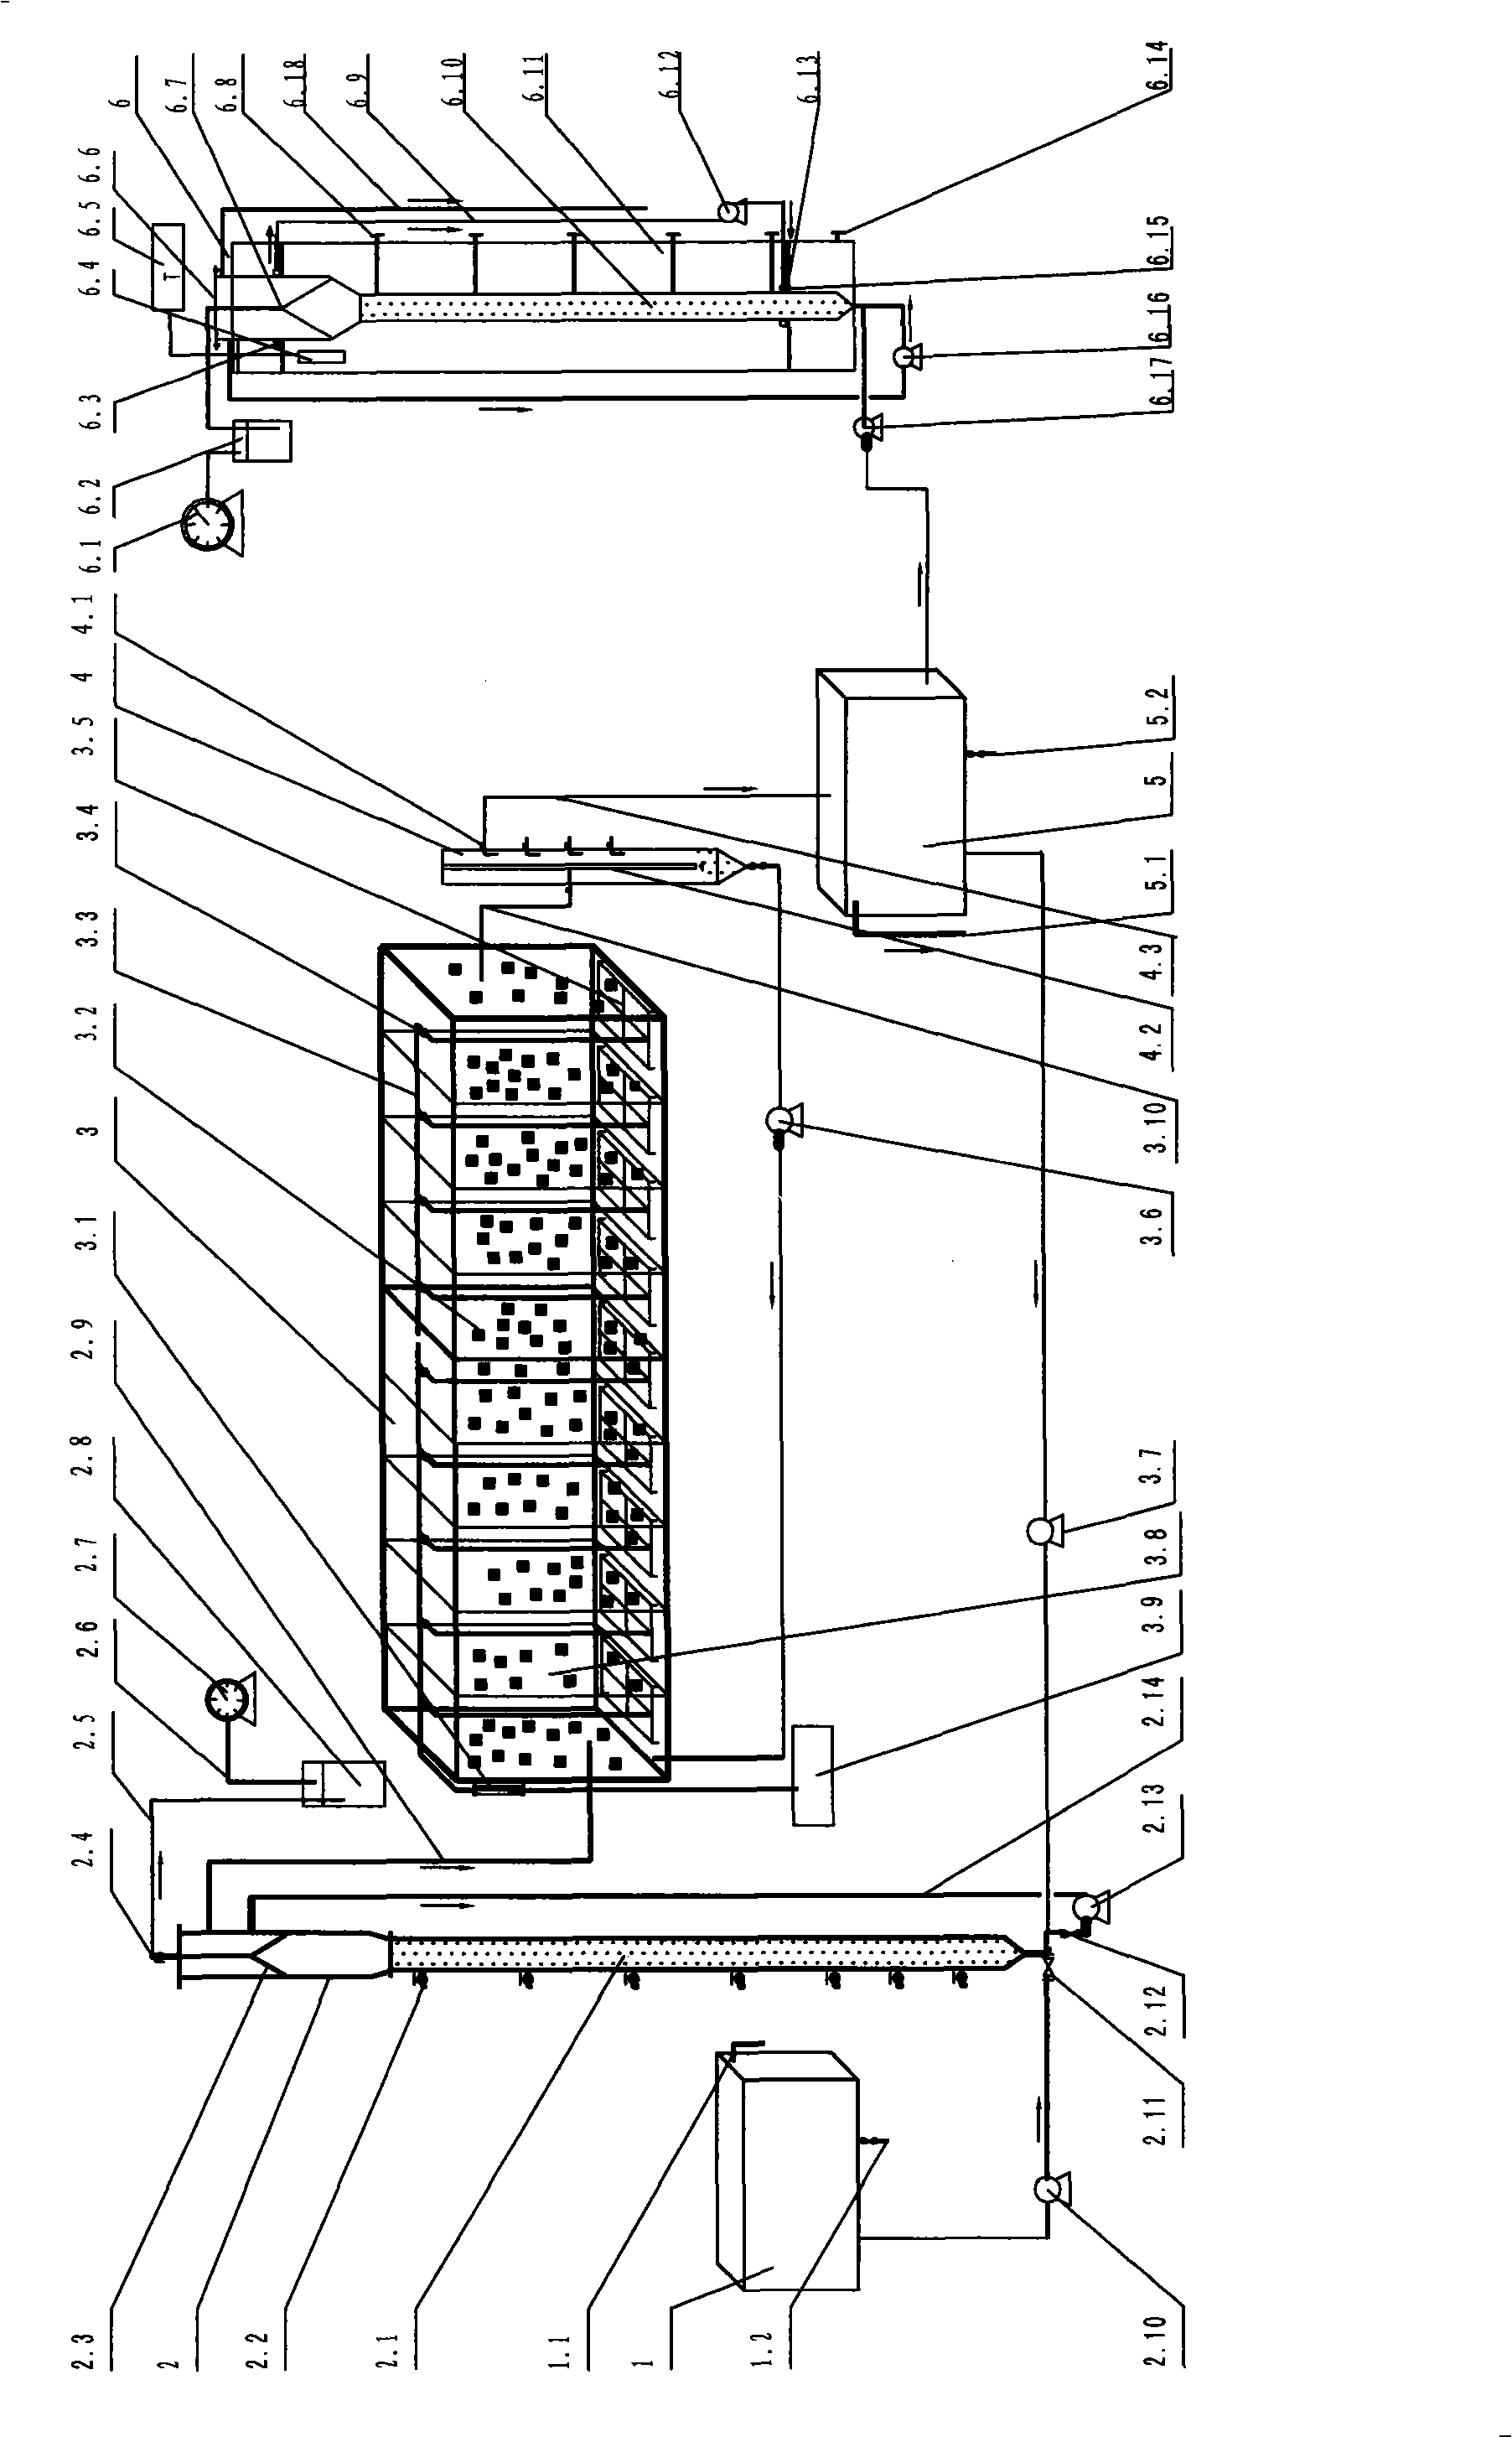 Apparatus and method for entire journey autotrophy denitrification of digested sludge dewatered liquid biomembrane